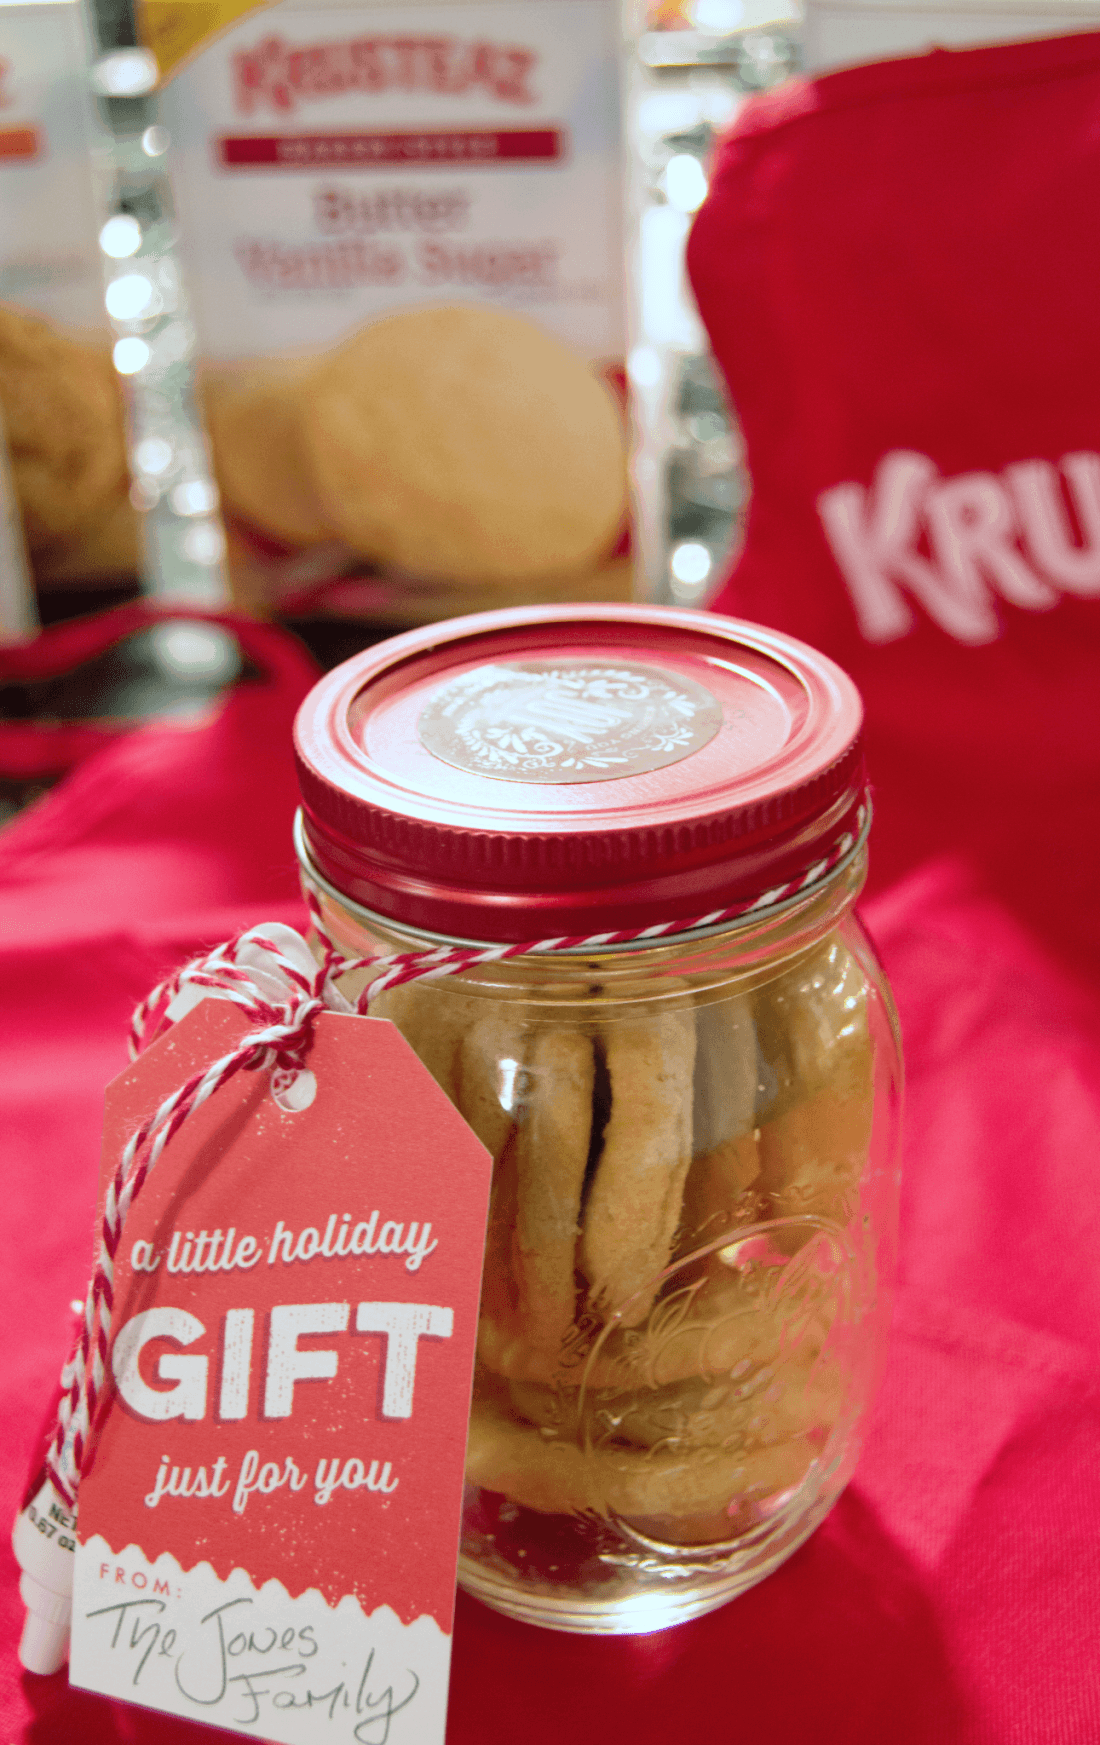 Gift Idea – Cookies With Frosting For Decorating!